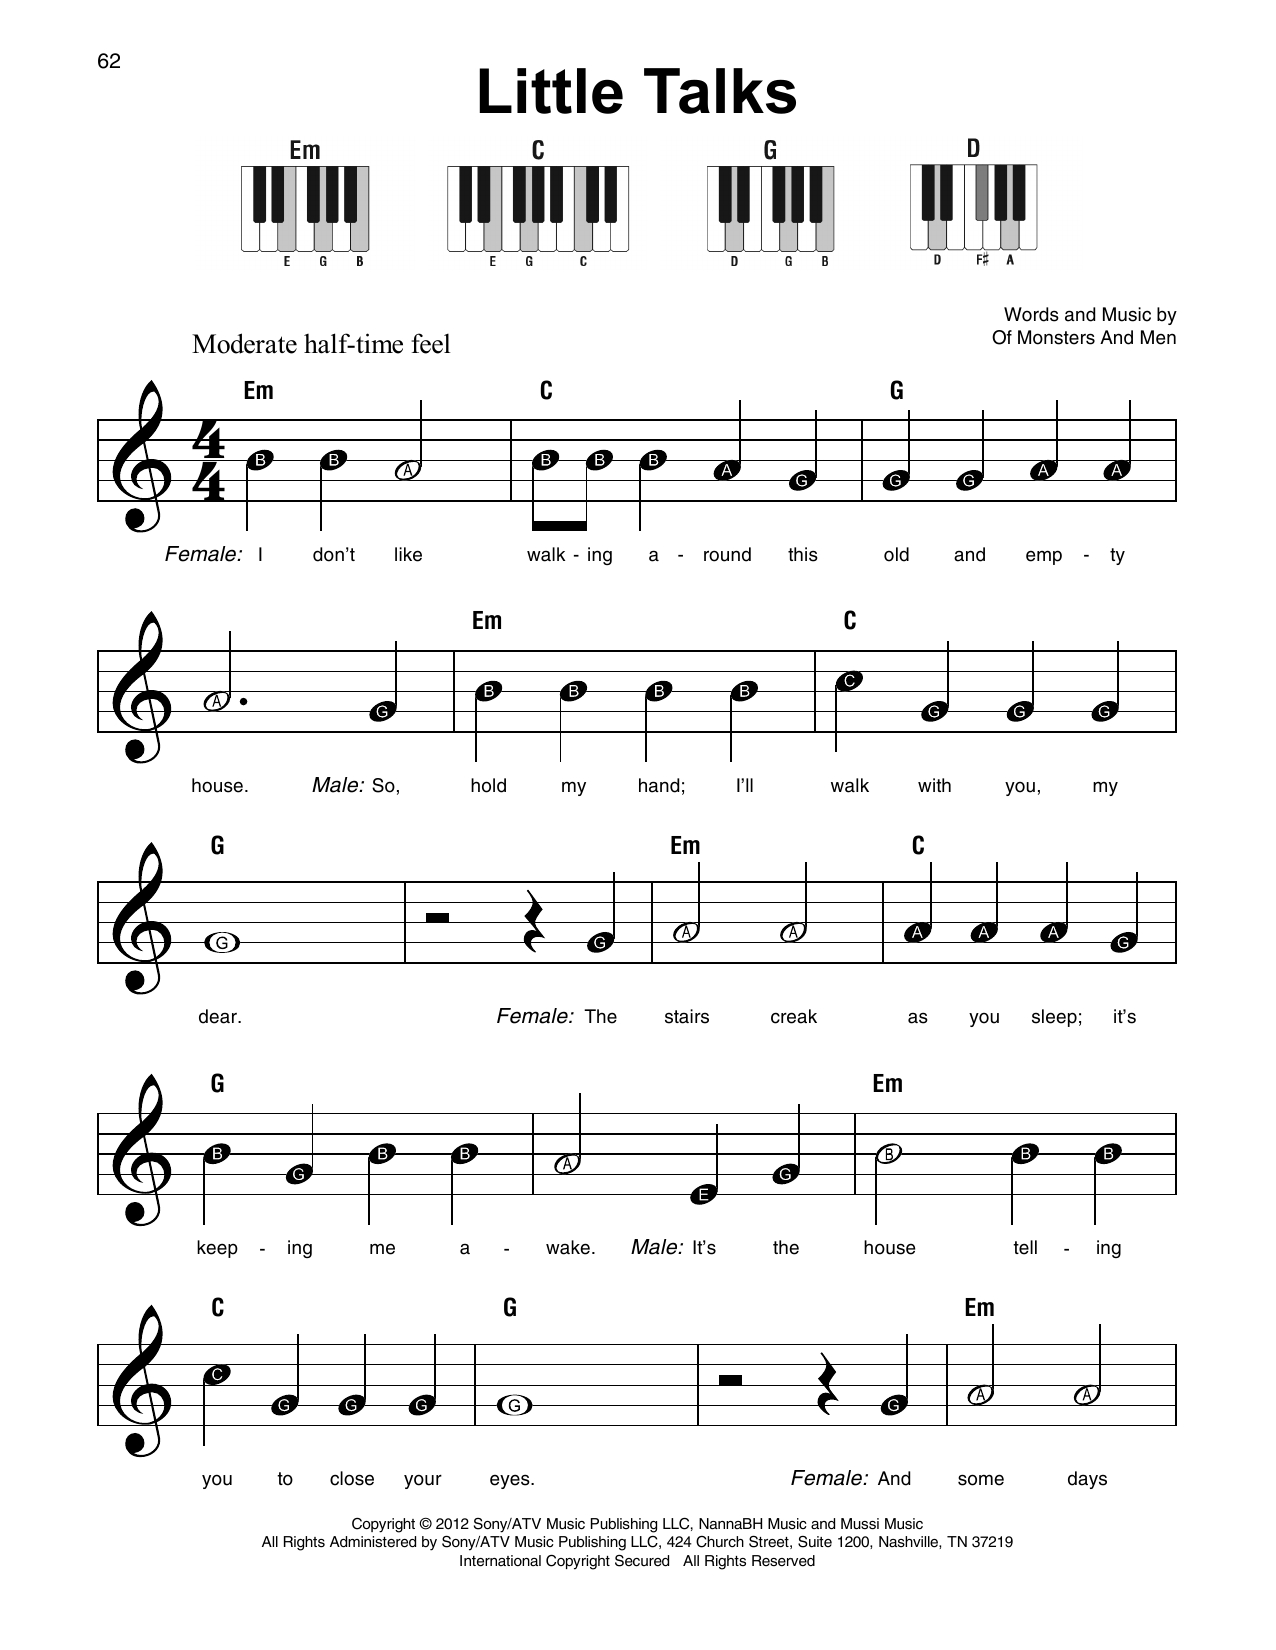 Dirty Paws Chords Sheet Music Digital Files To Print Licensed Of Monsters And Men